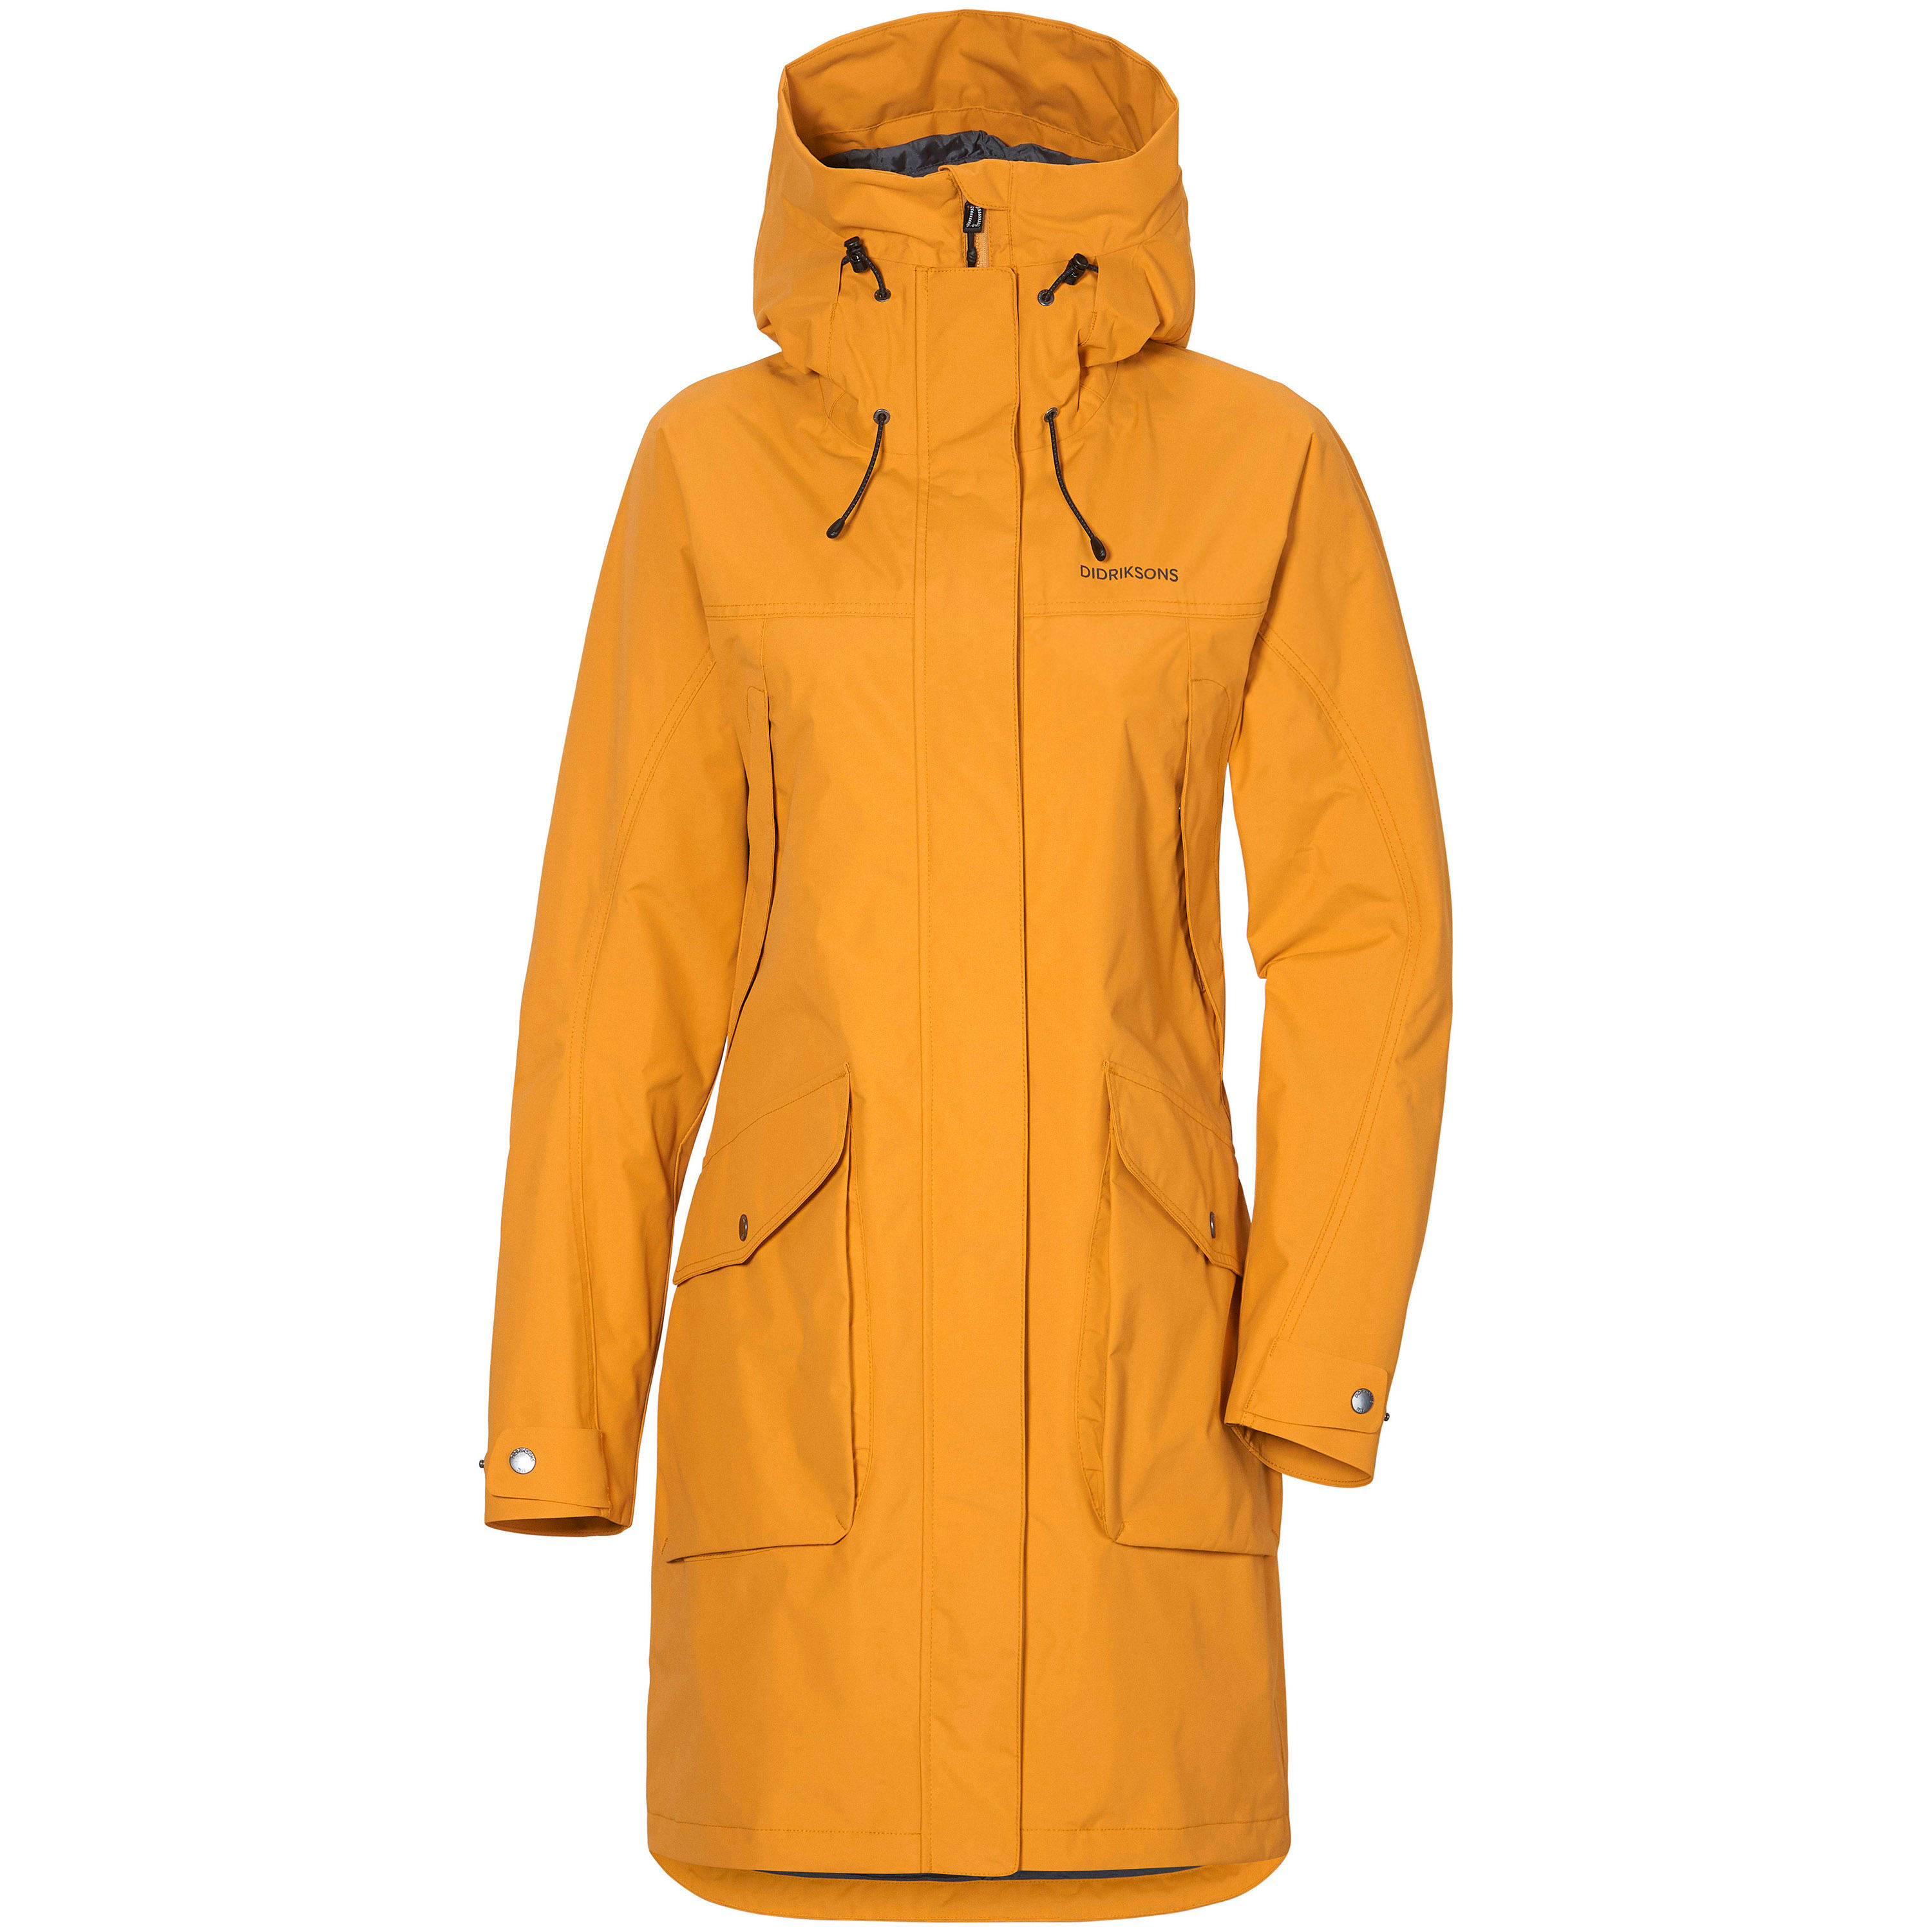 Køb Didriksons Thelma Women's Parka 6 Outnorth